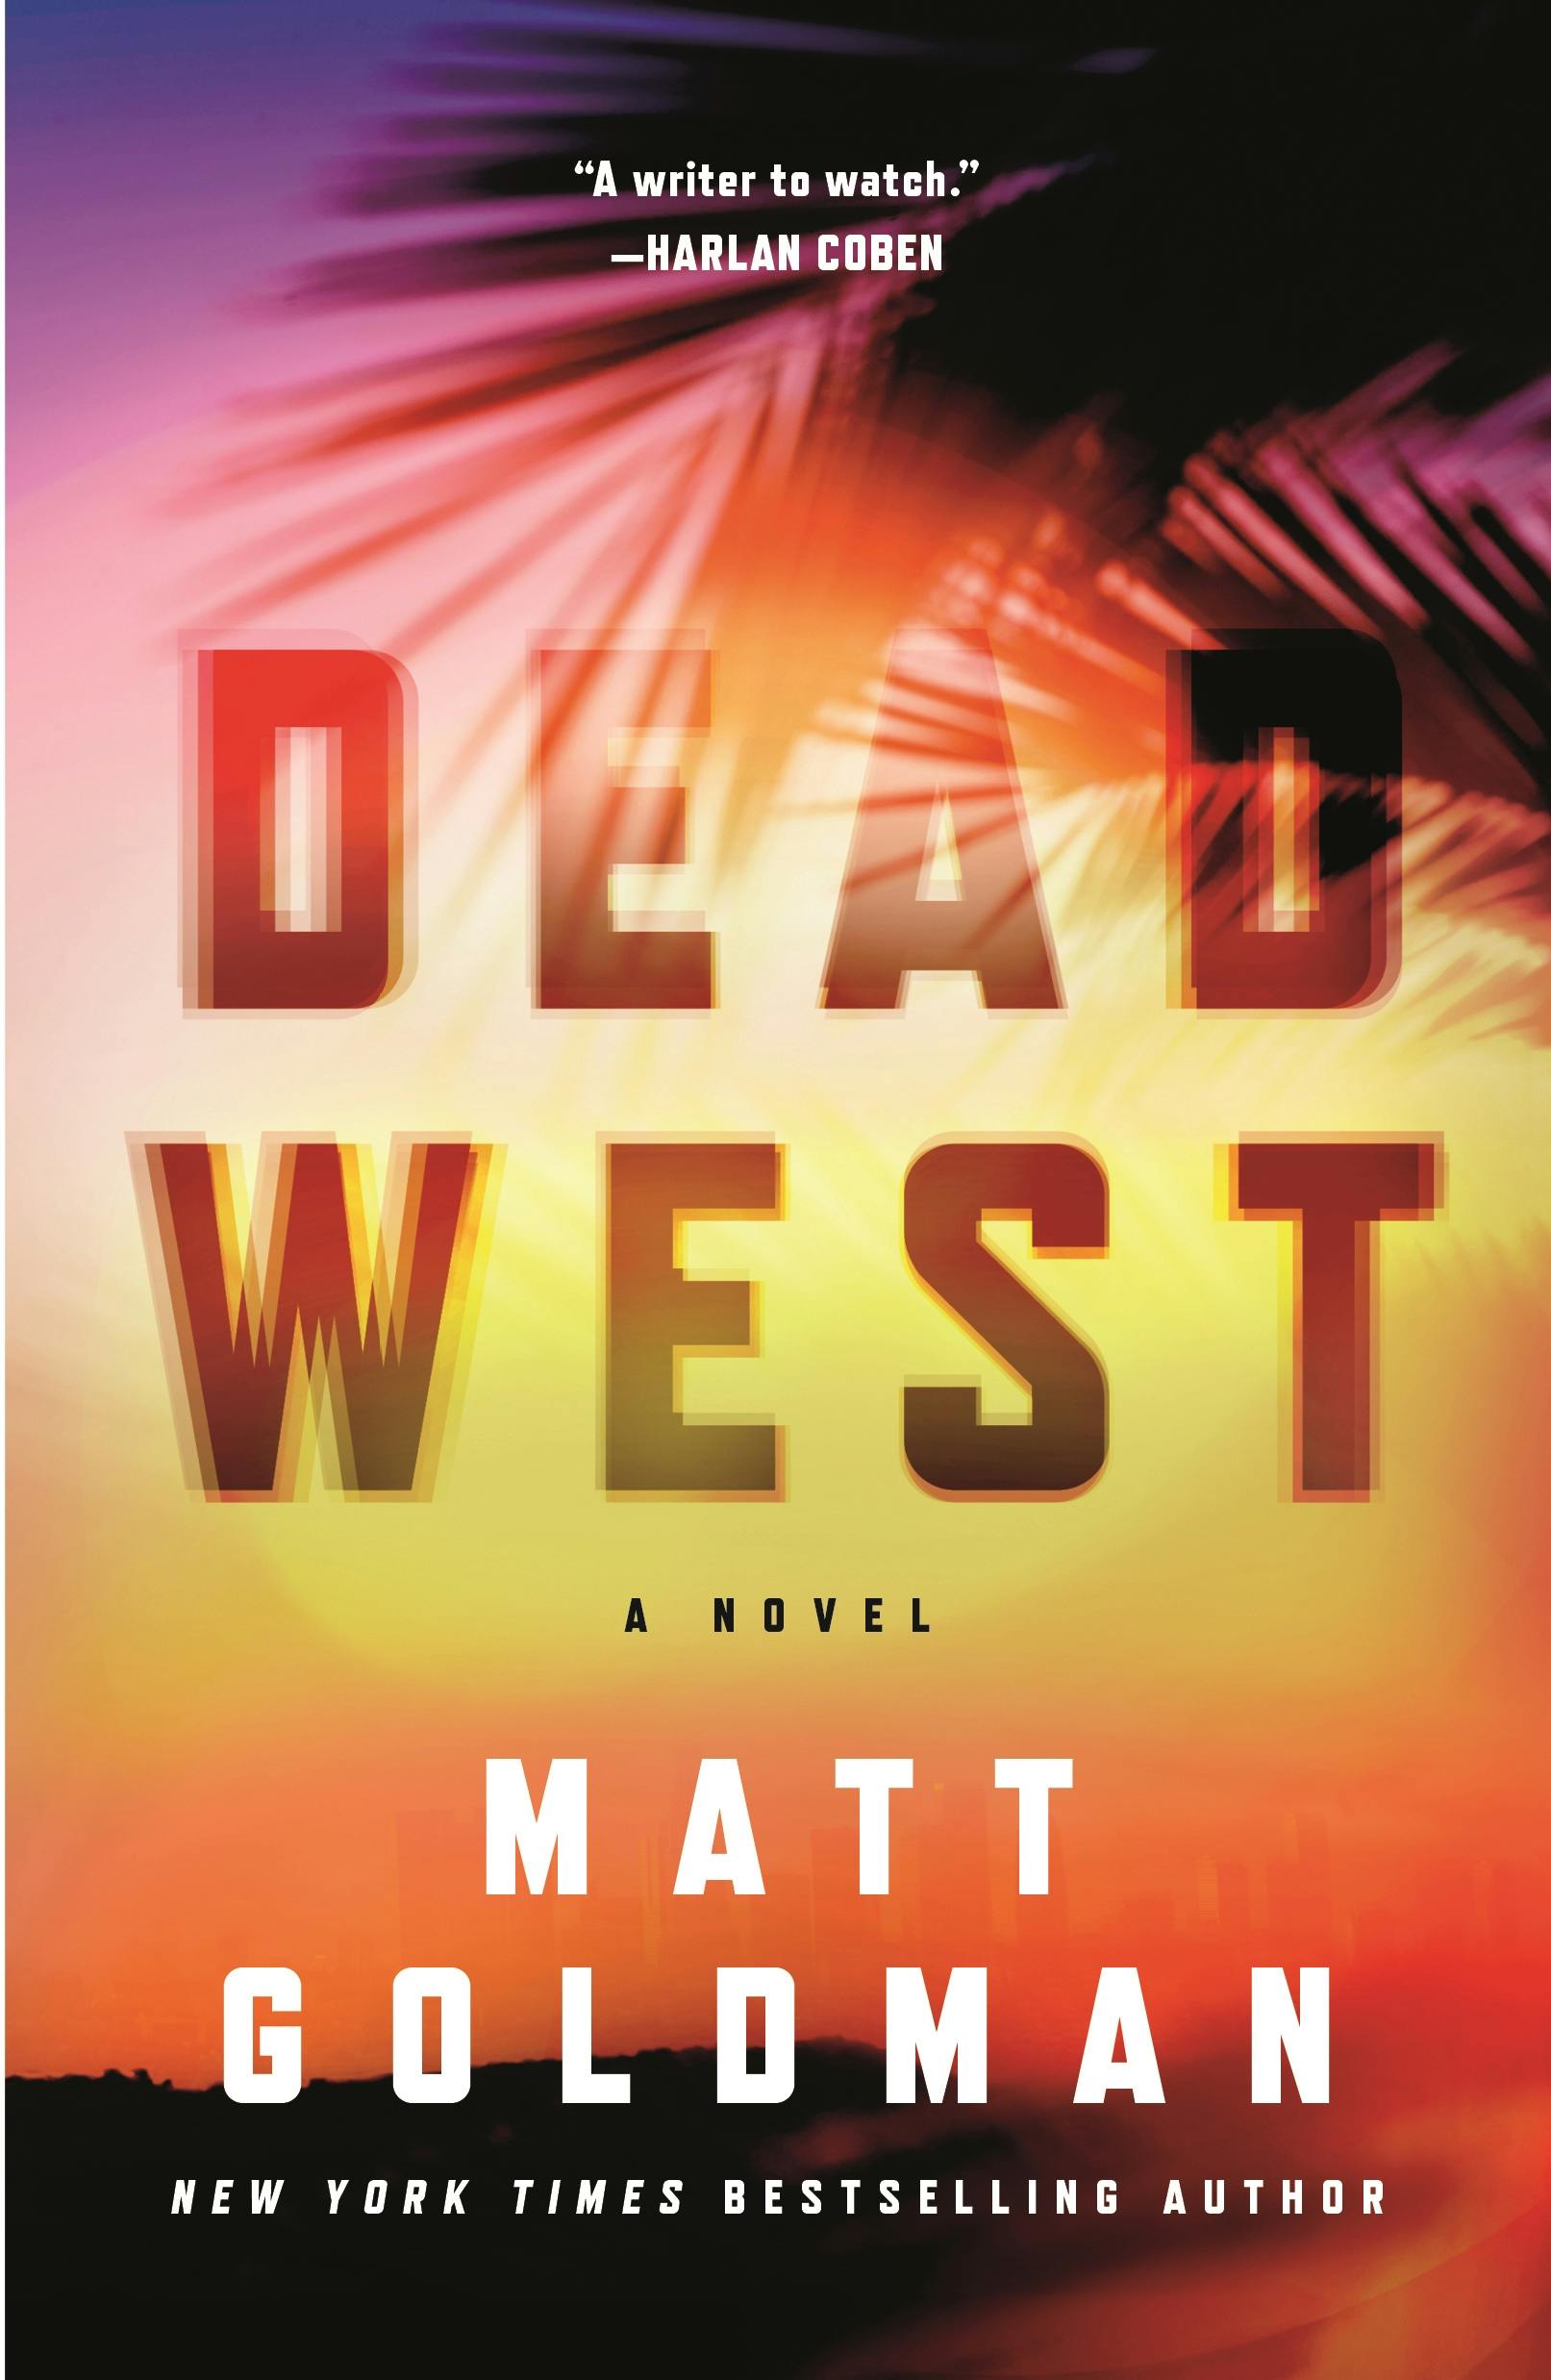 Cover for the book titled as: Dead West